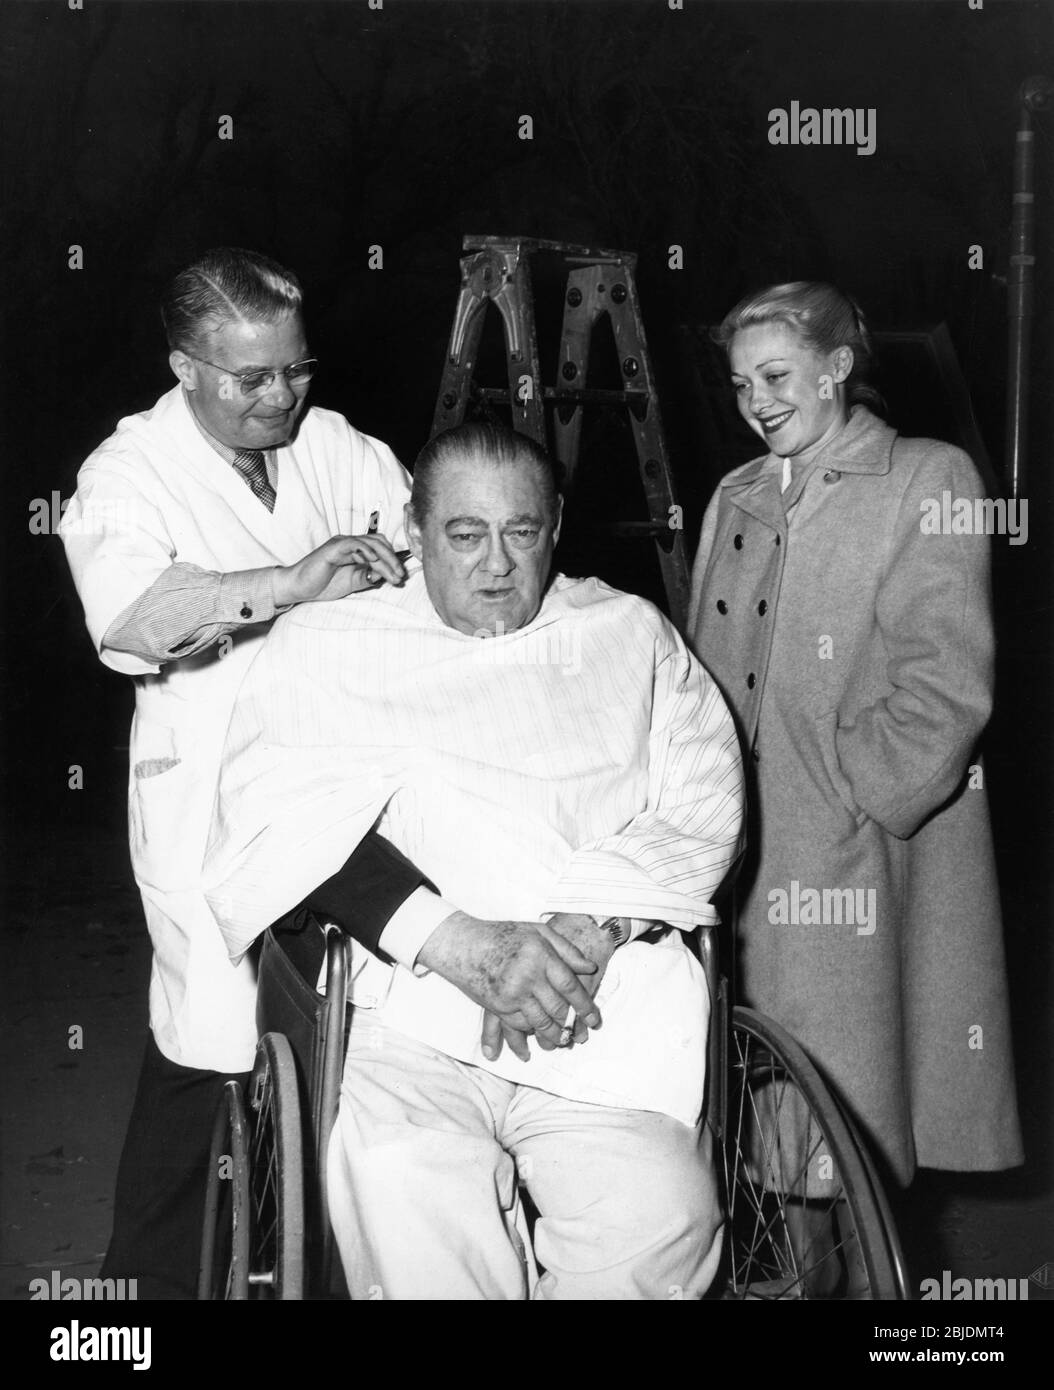 LIONEL BARRYMORE gets a haircut from Studio Barber WALTER HORN as Hairdresser BETTE LOU DELMONT watches on set candid during filming of KEY LARGO 1948 director JOHN HUSTON screenplay RICHARD BROOKS and JOHN HUSTON based on the play by MAXWELL ANDERSON Warner Bros. Stock Photo